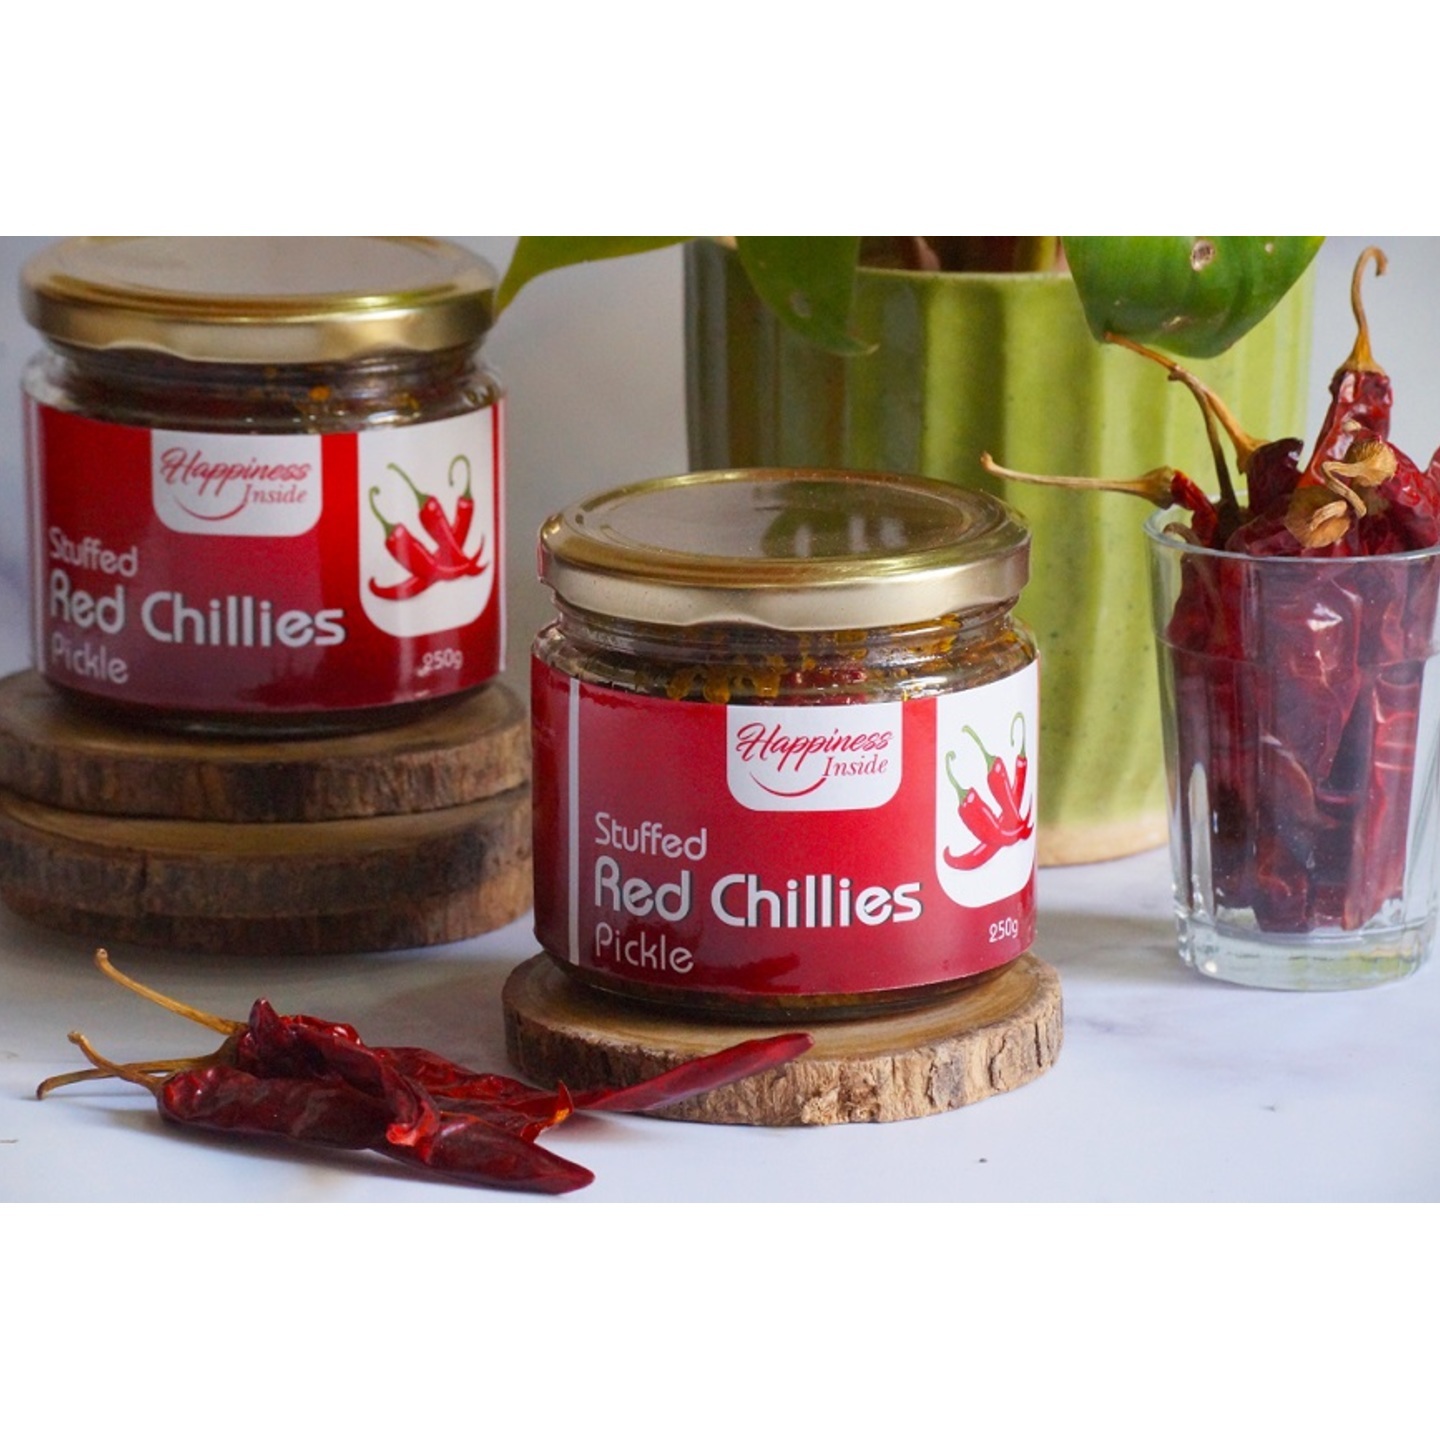 Stuffed Red Chillies Pickle 250 grams